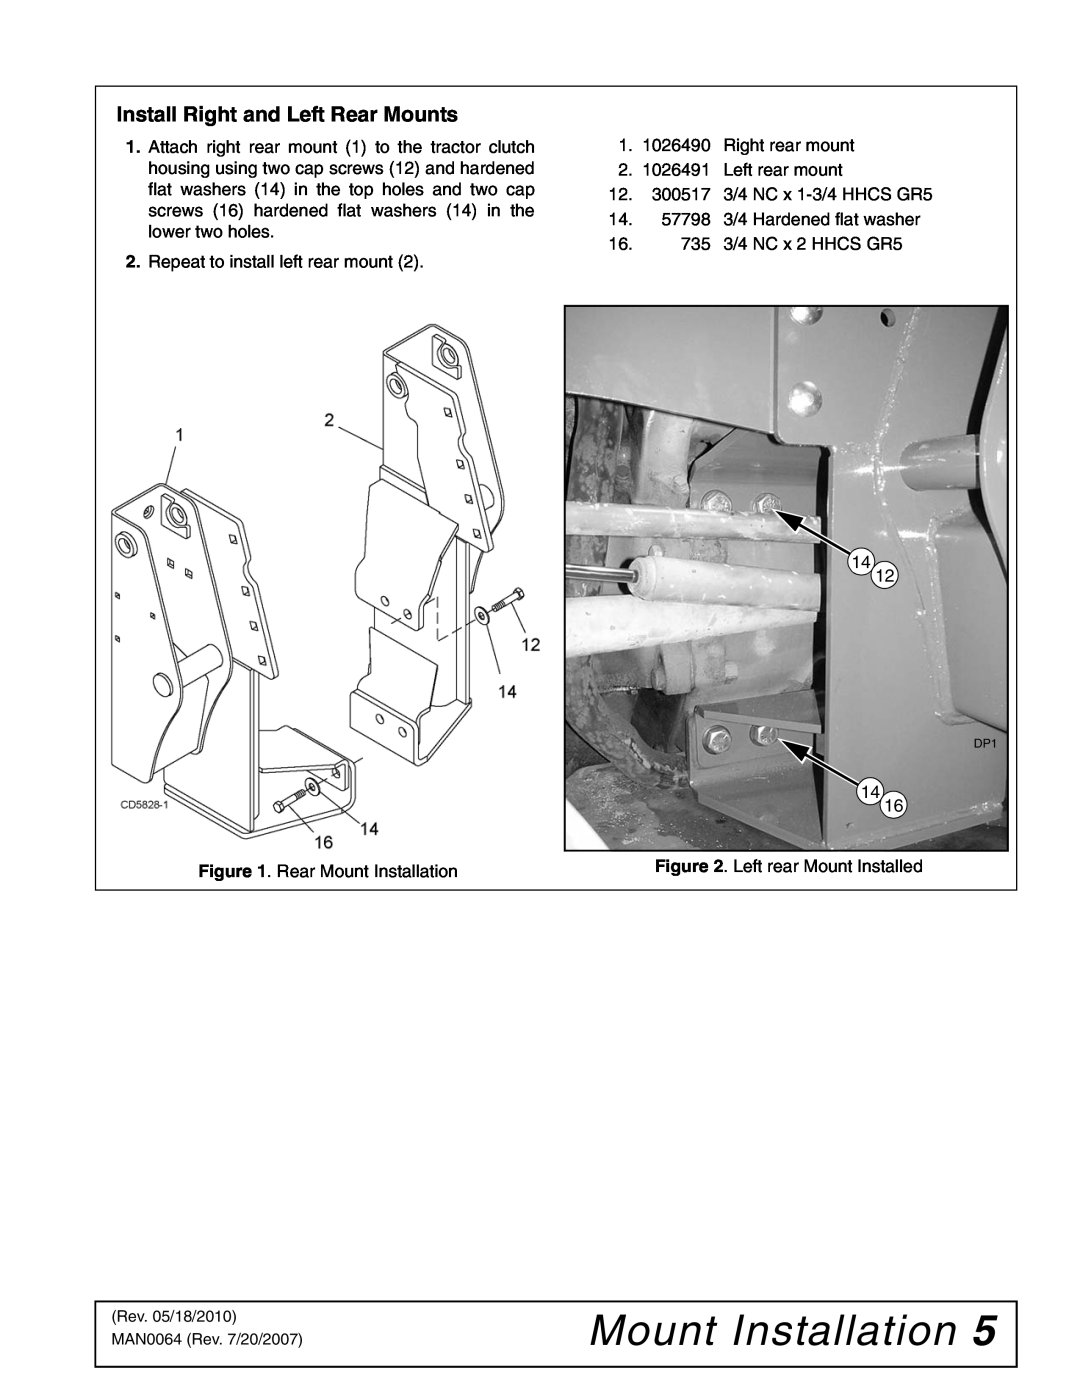 Woods Equipment 111877 manual Install Right and Left Rear Mounts, Rear Mount Installation, Left rear Mount Installed 